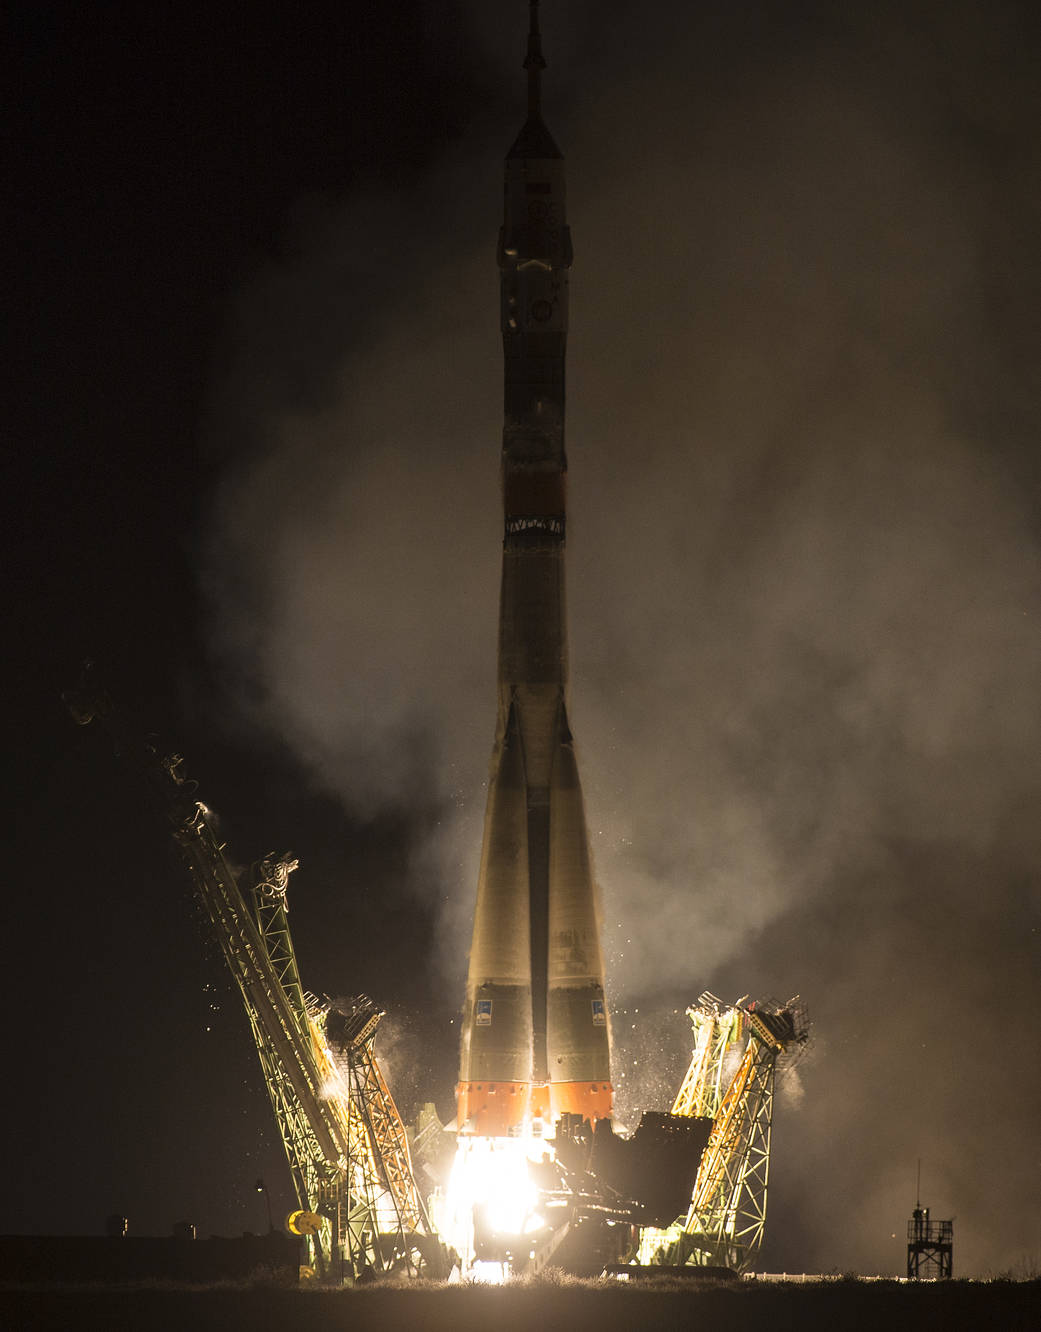 Soyuz TMA-20M rocket launches from the Baikonur Cosmodrome in Kazakhstan on Saturday, March 19, 2016 